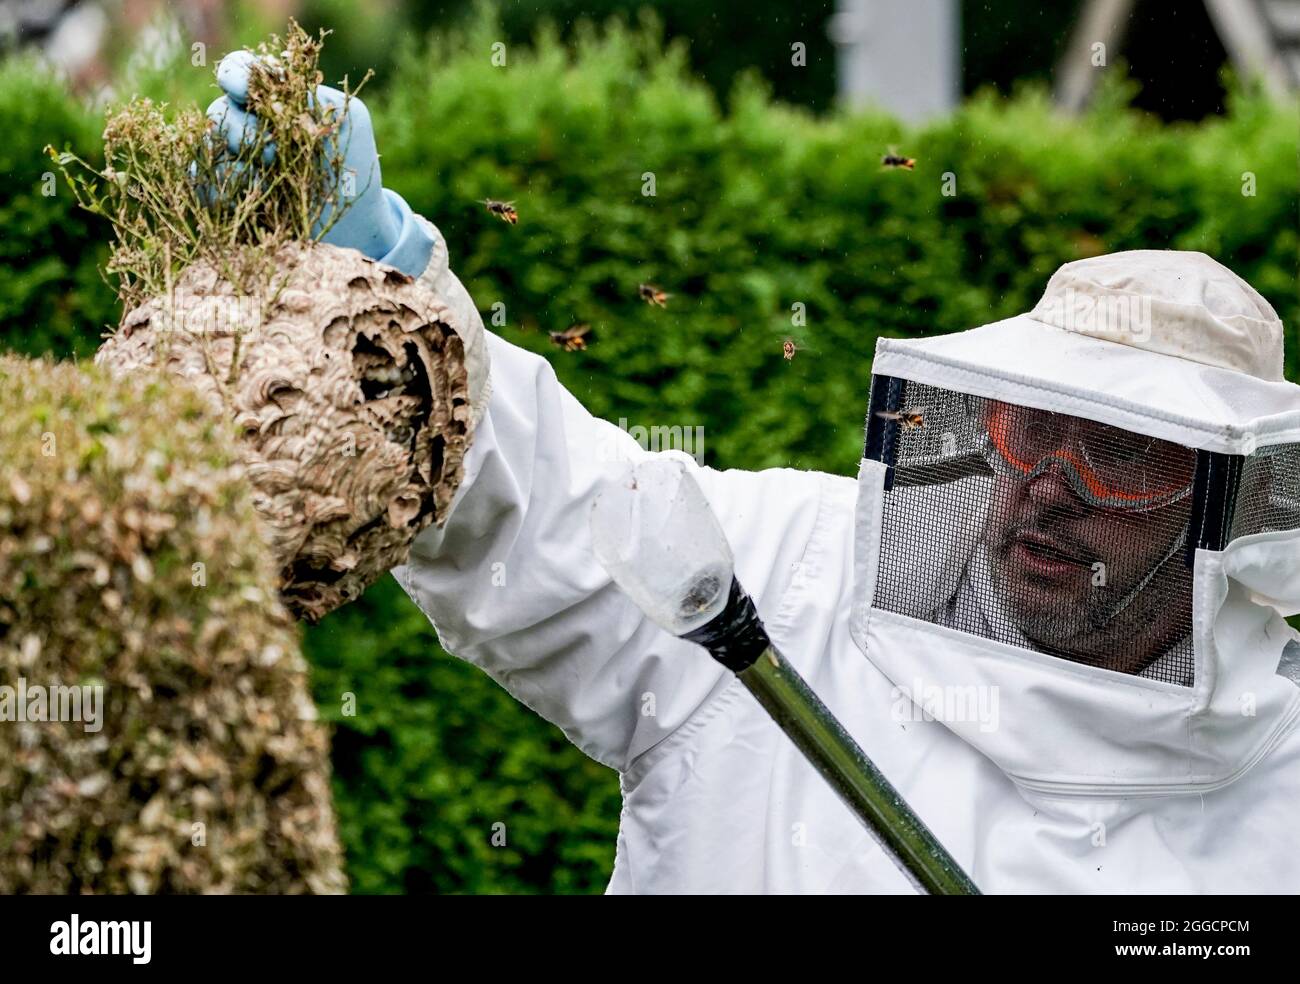 Hamburg, Germany. 27th Aug, 2021. A nest of the Asian hornet (Vespa Velutina Nigrithorax) is removed from a hedge by an entomologist in the Farmsen-Berne district of Hamburg. The nest was brought to the University of Hamburg for research purposes. According to the environmental authority, Asian hornets are no more dangerous to humans than the native European hornets. (to dpa 'New nest of Asian hornet found in Hamburg') Credit: Axel Heimken/dpa/Alamy Live News Stock Photo